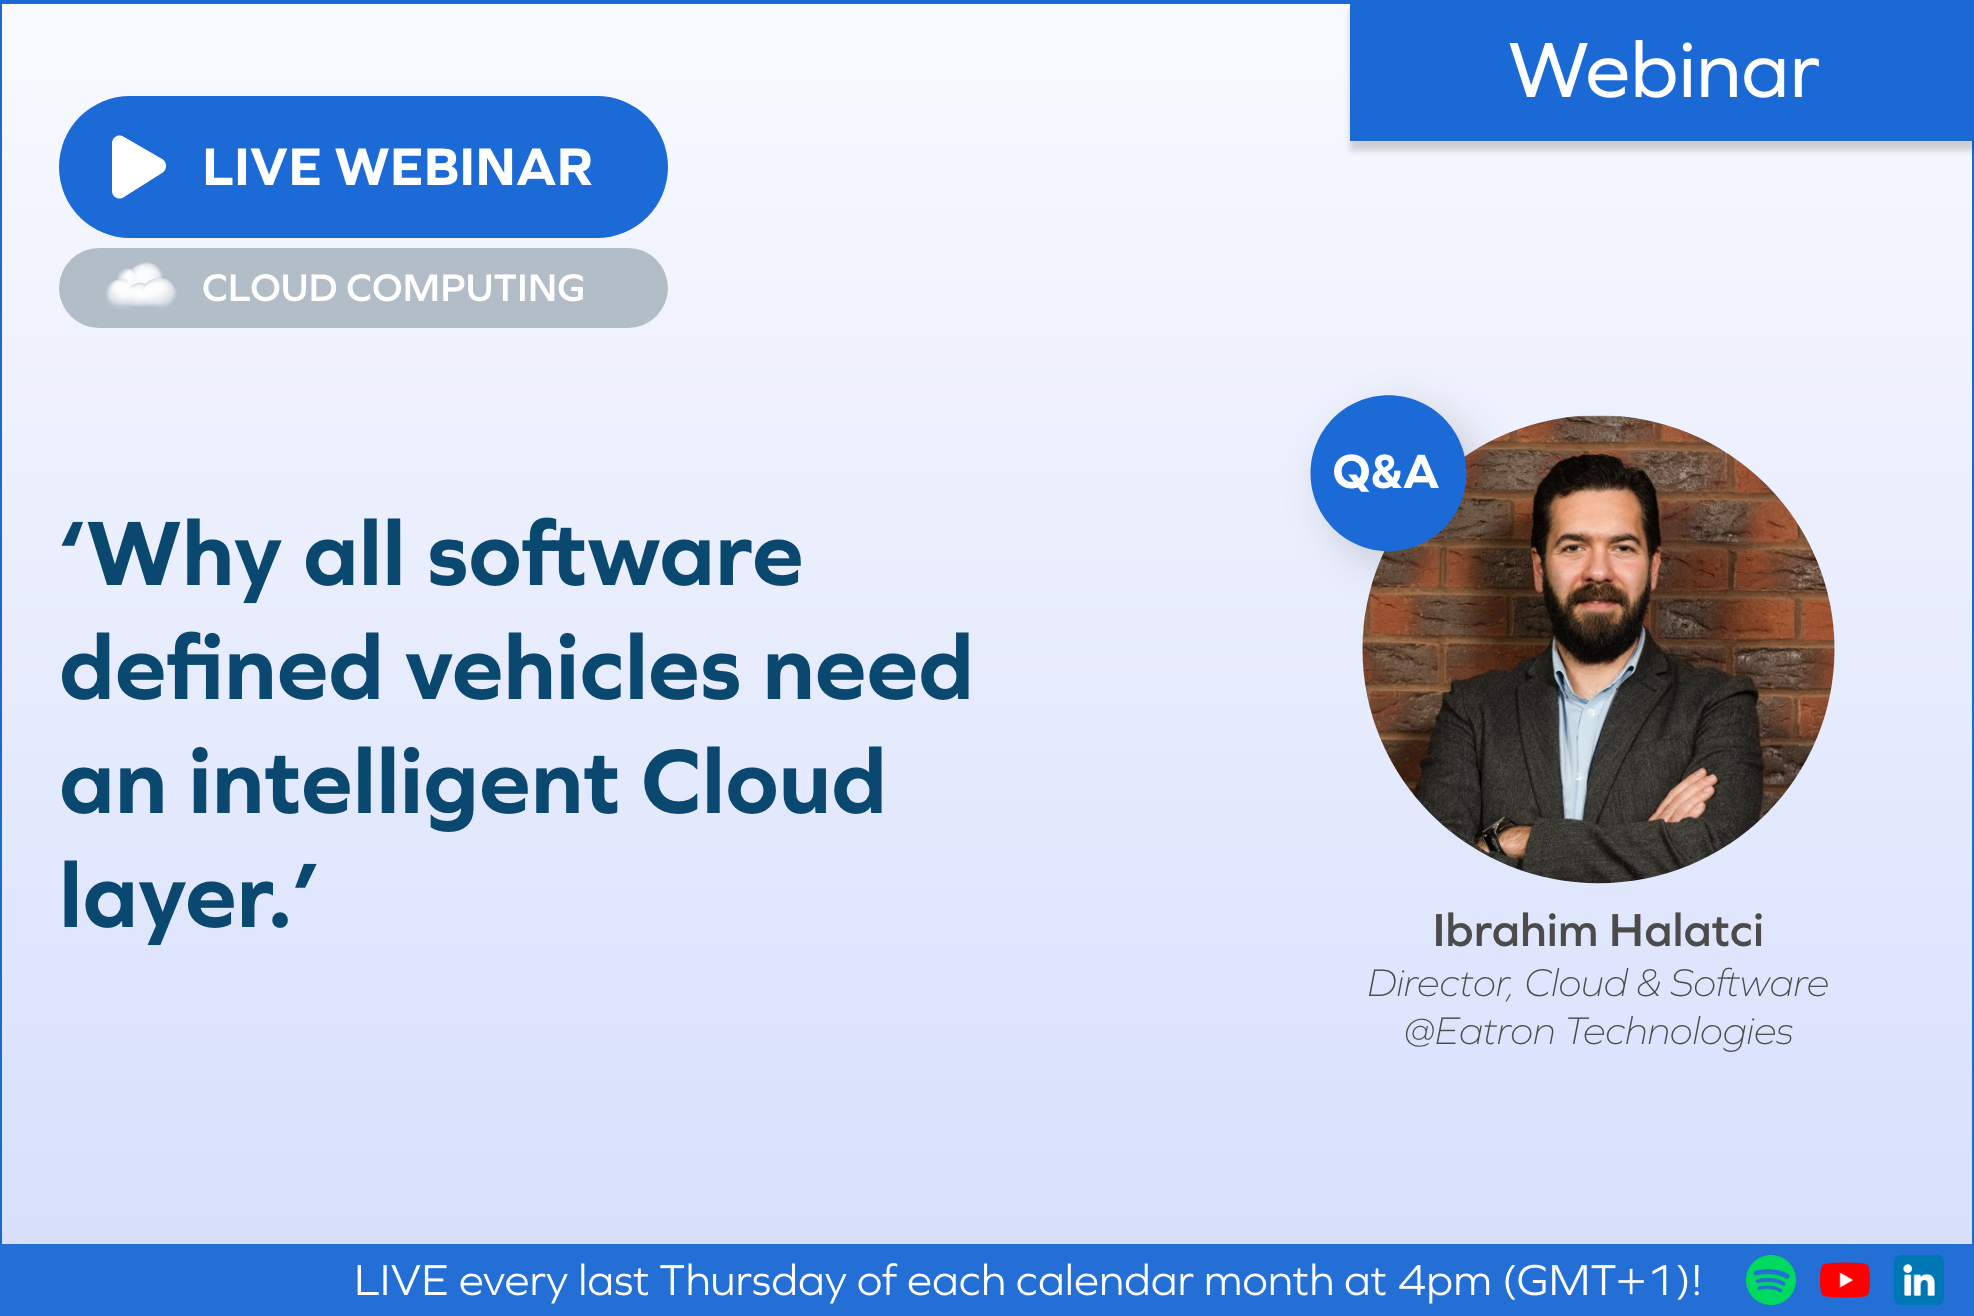 Why all software defined vehicles need an intelligent Cloud layer